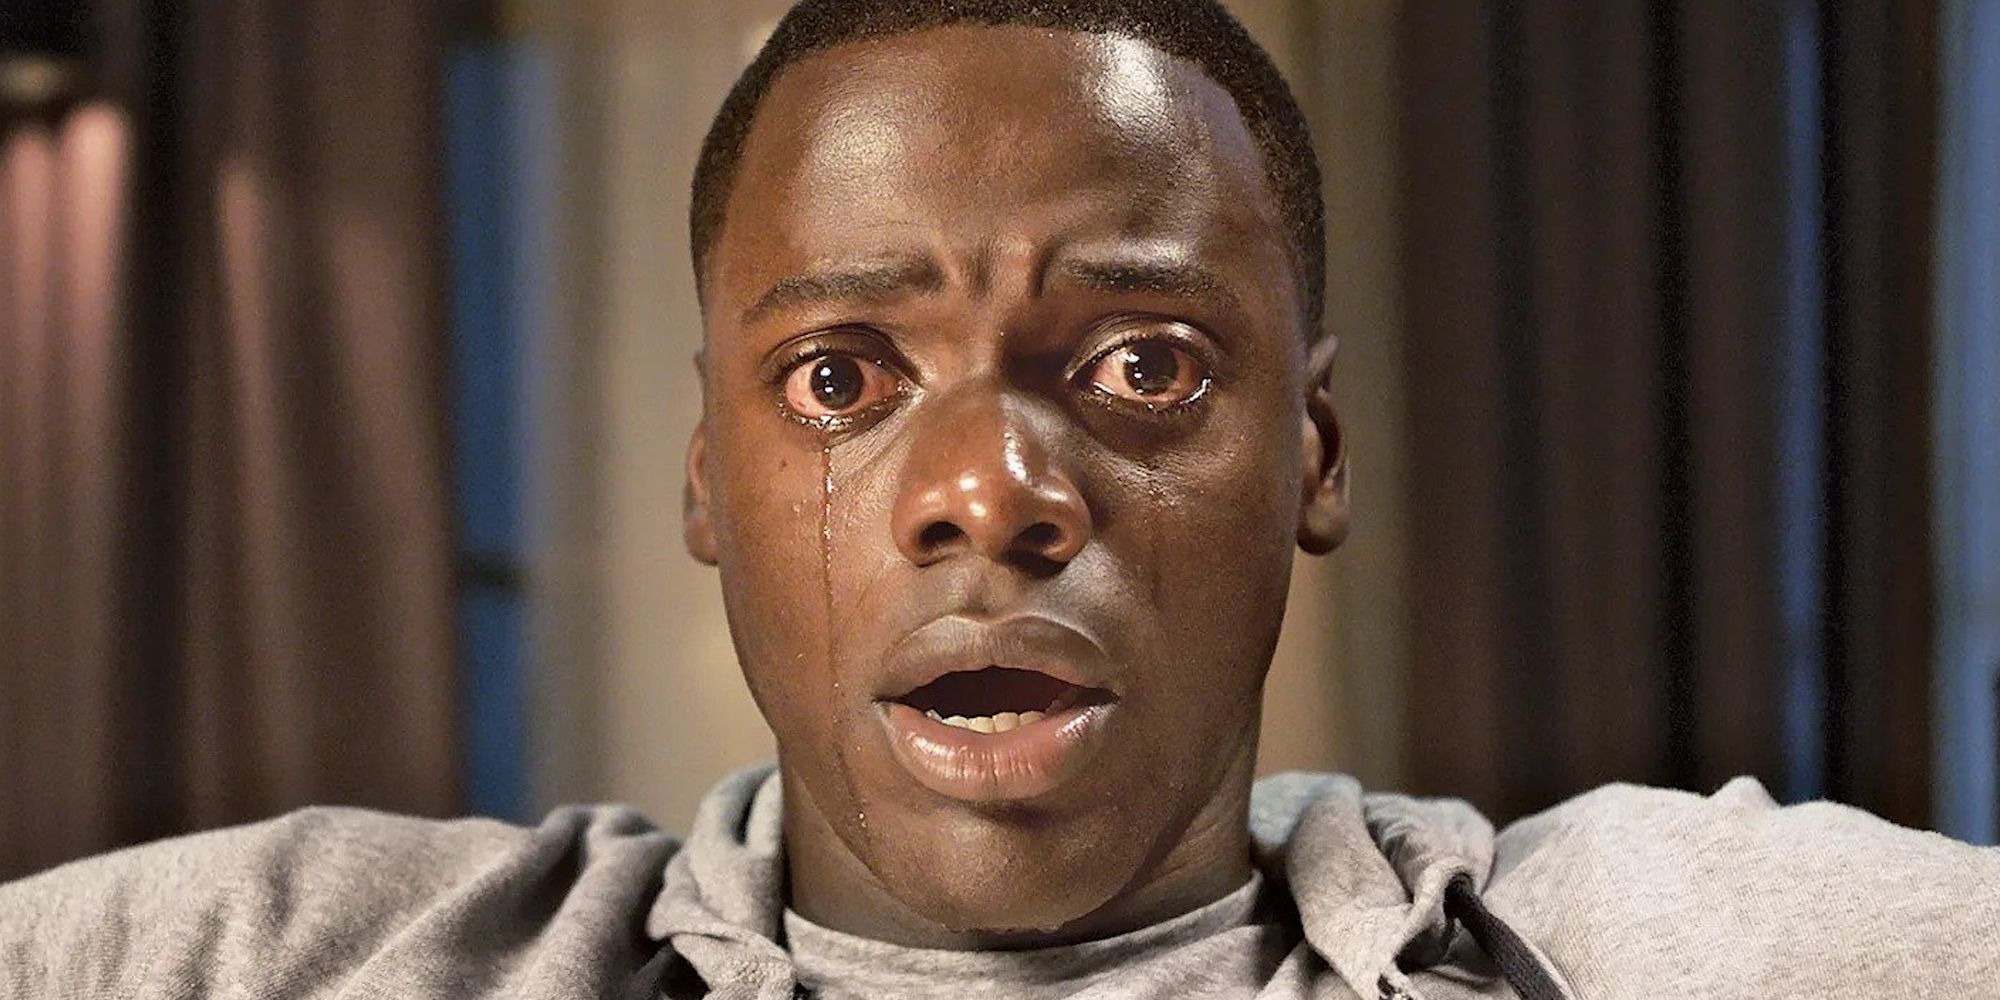 Daniel Kaluuya looks shocked and cries out.